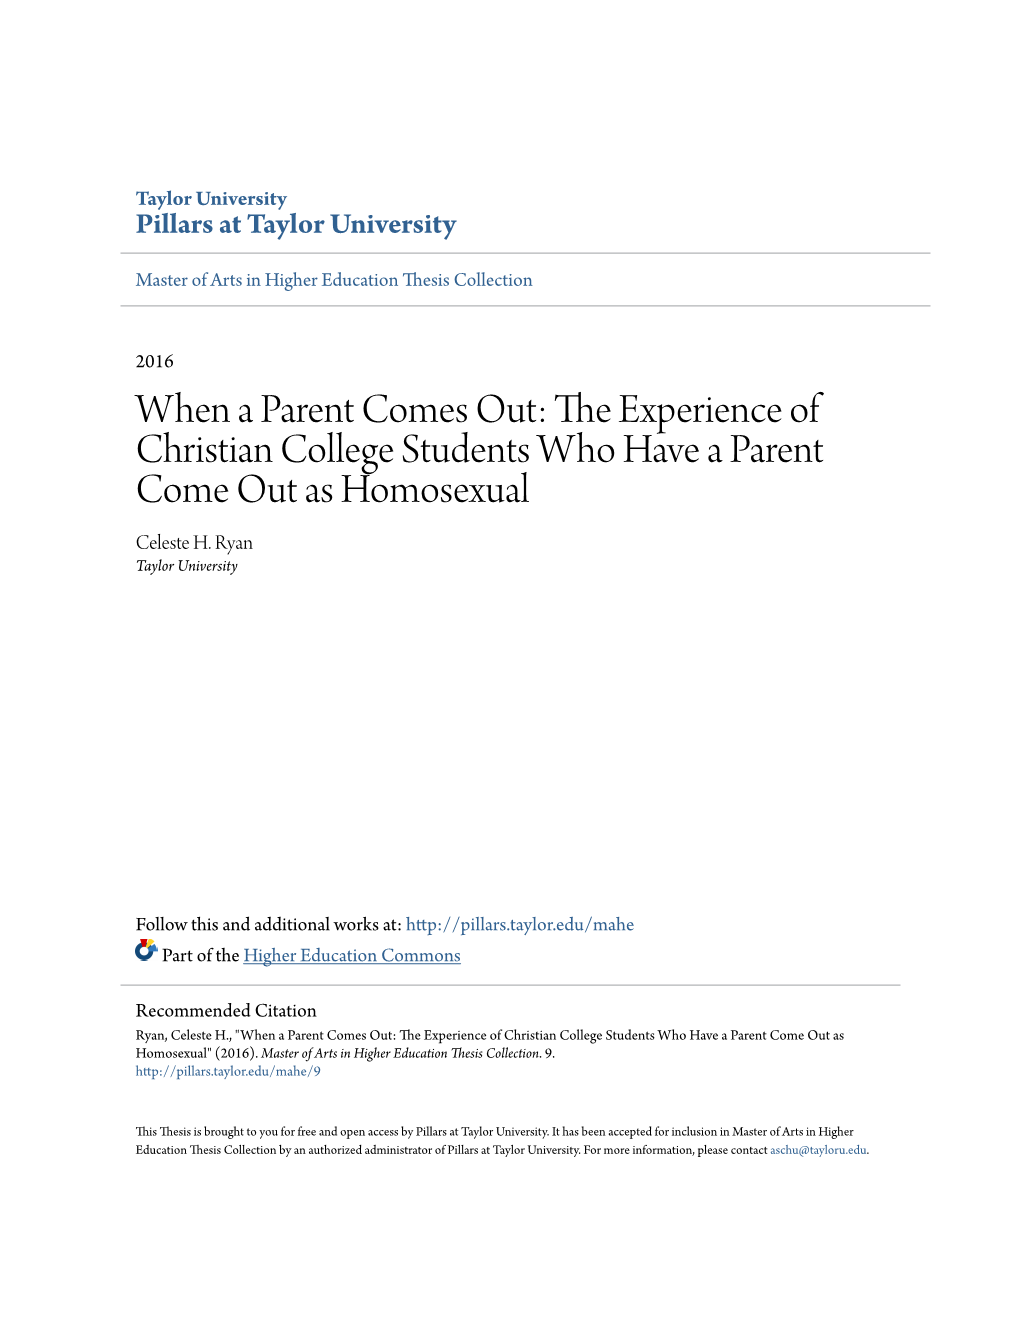 The Experience of Christian College Students Who Have a Parent Come out As Homosexual Celeste H